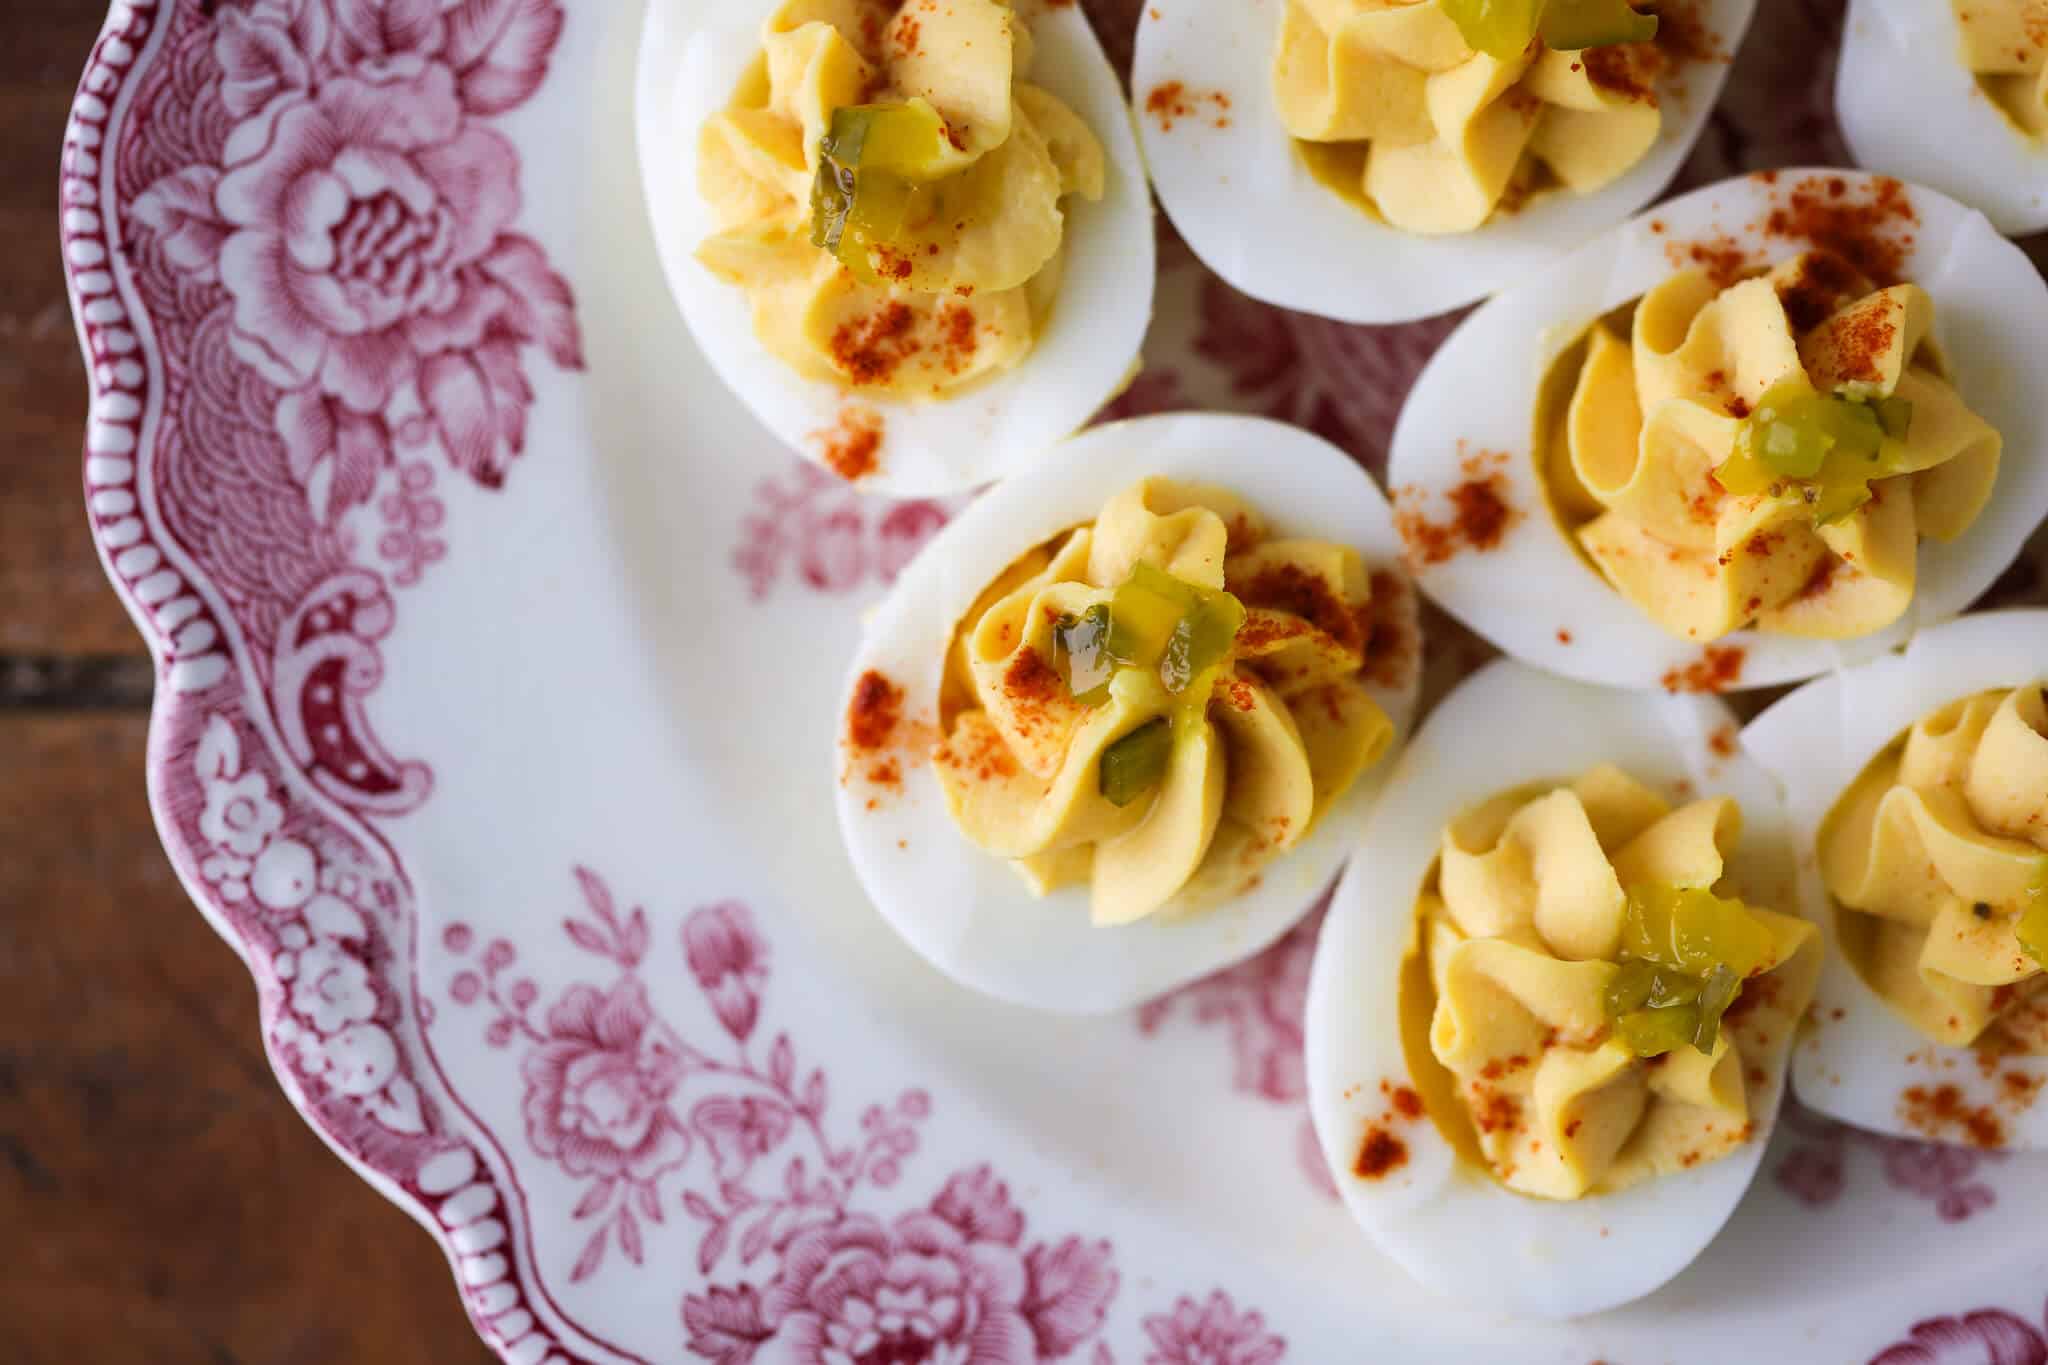 Perfectly coiffed deviled egg filling on white hard boiled egg whites.